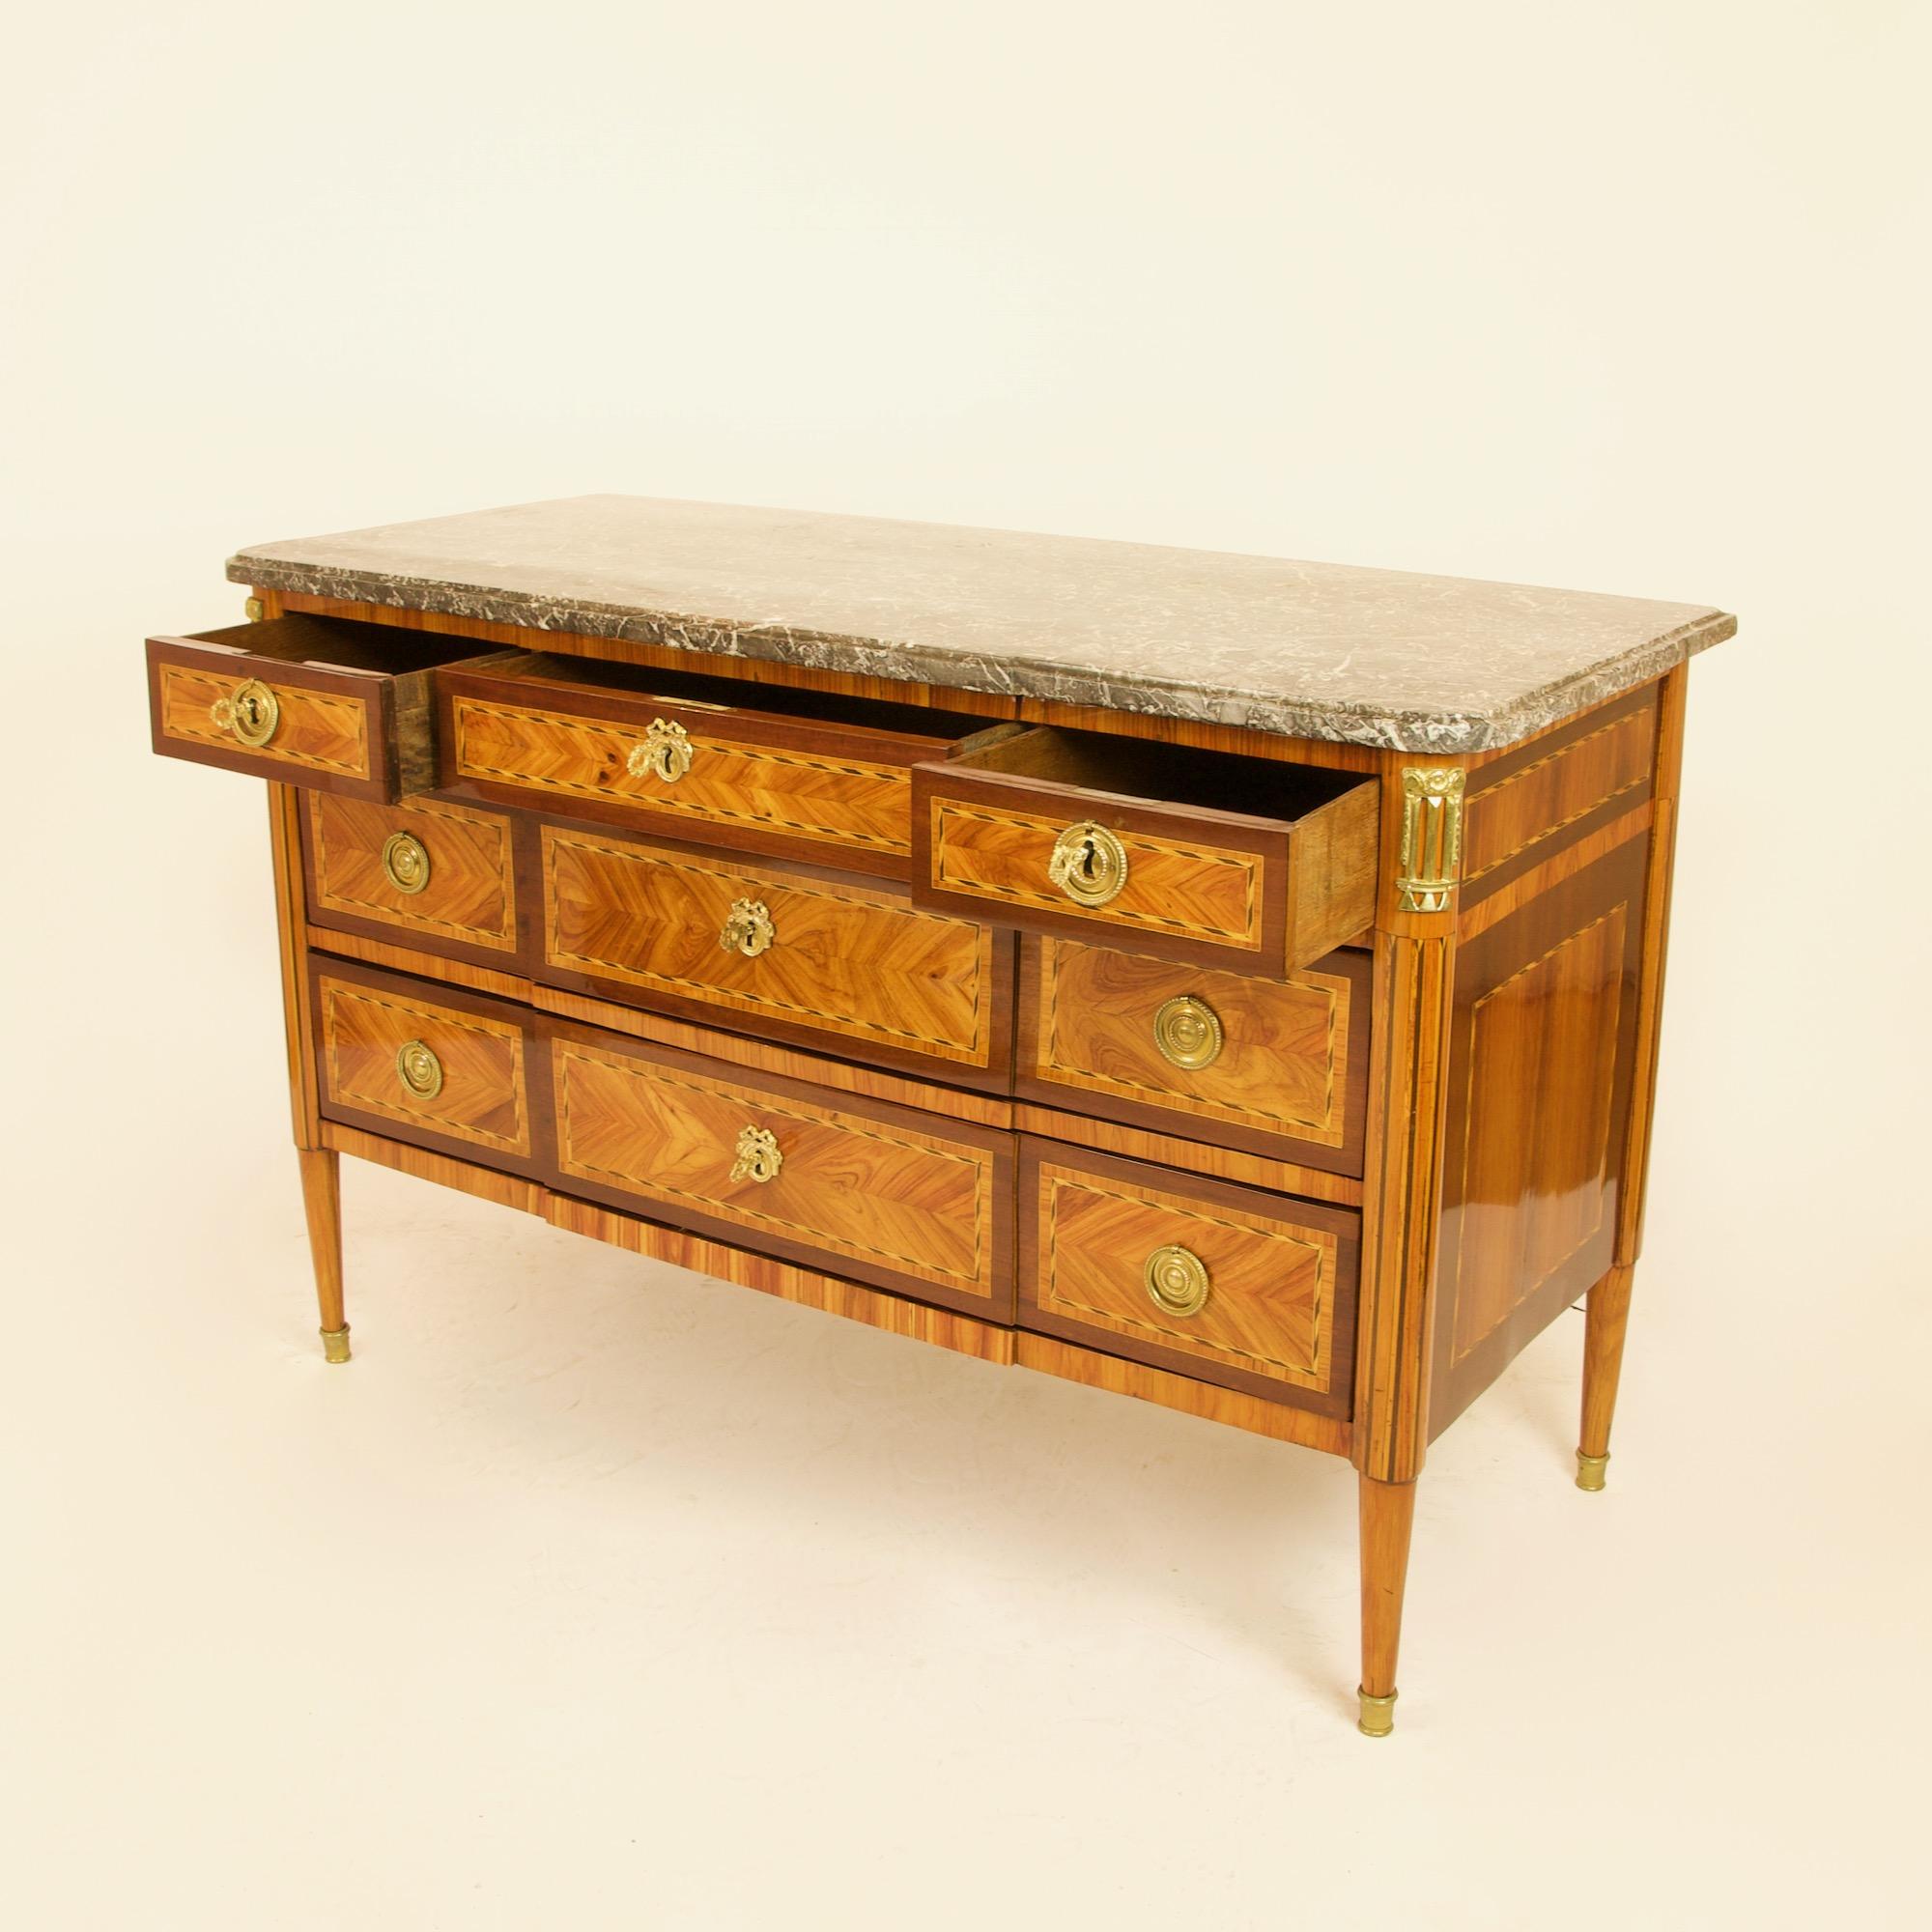 18th Century Louis XVI Neoclassical Marquetry Gilt Bronze Commode or Sauteuse For Sale 4